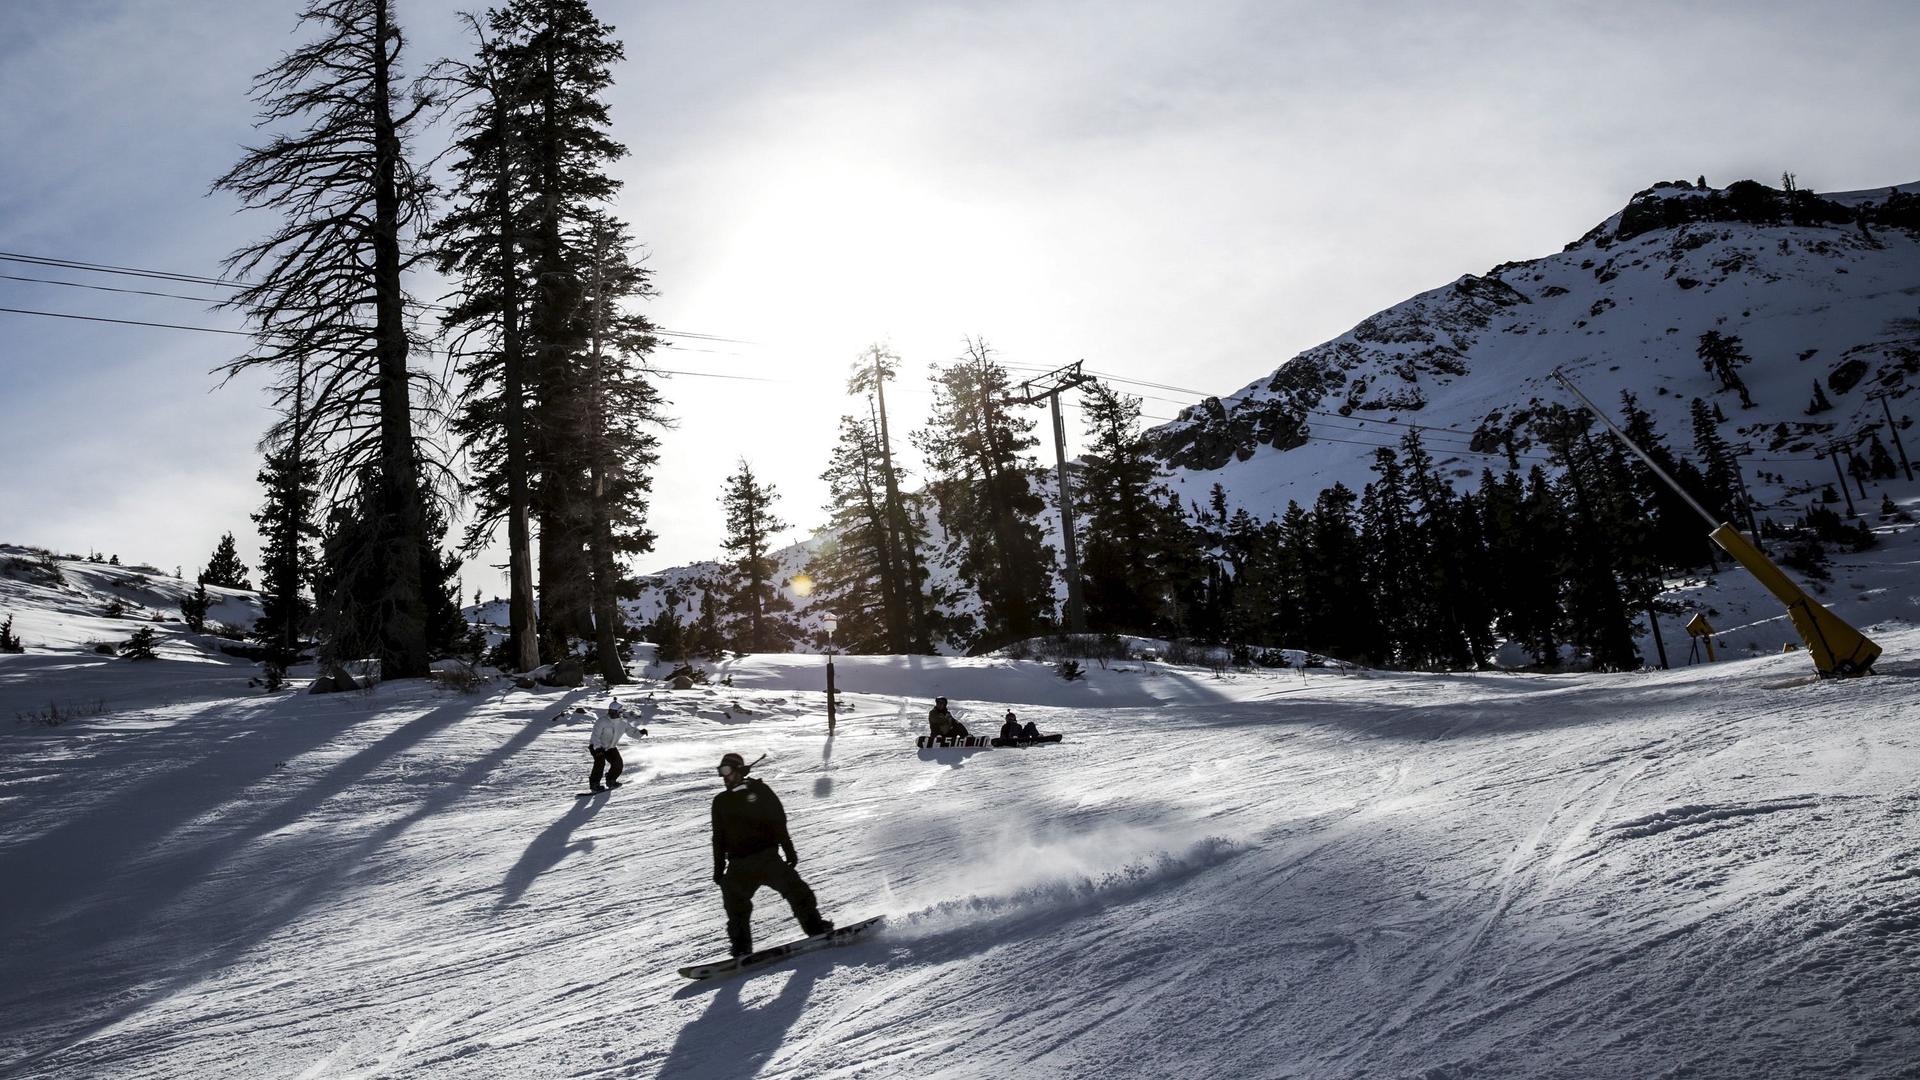 A snowboarder heads back to the lodge at Squaw Valley in Olympic Valley, California, Dec. 5, 2015. Last month, the resort announced plans to change its name in the coming year.